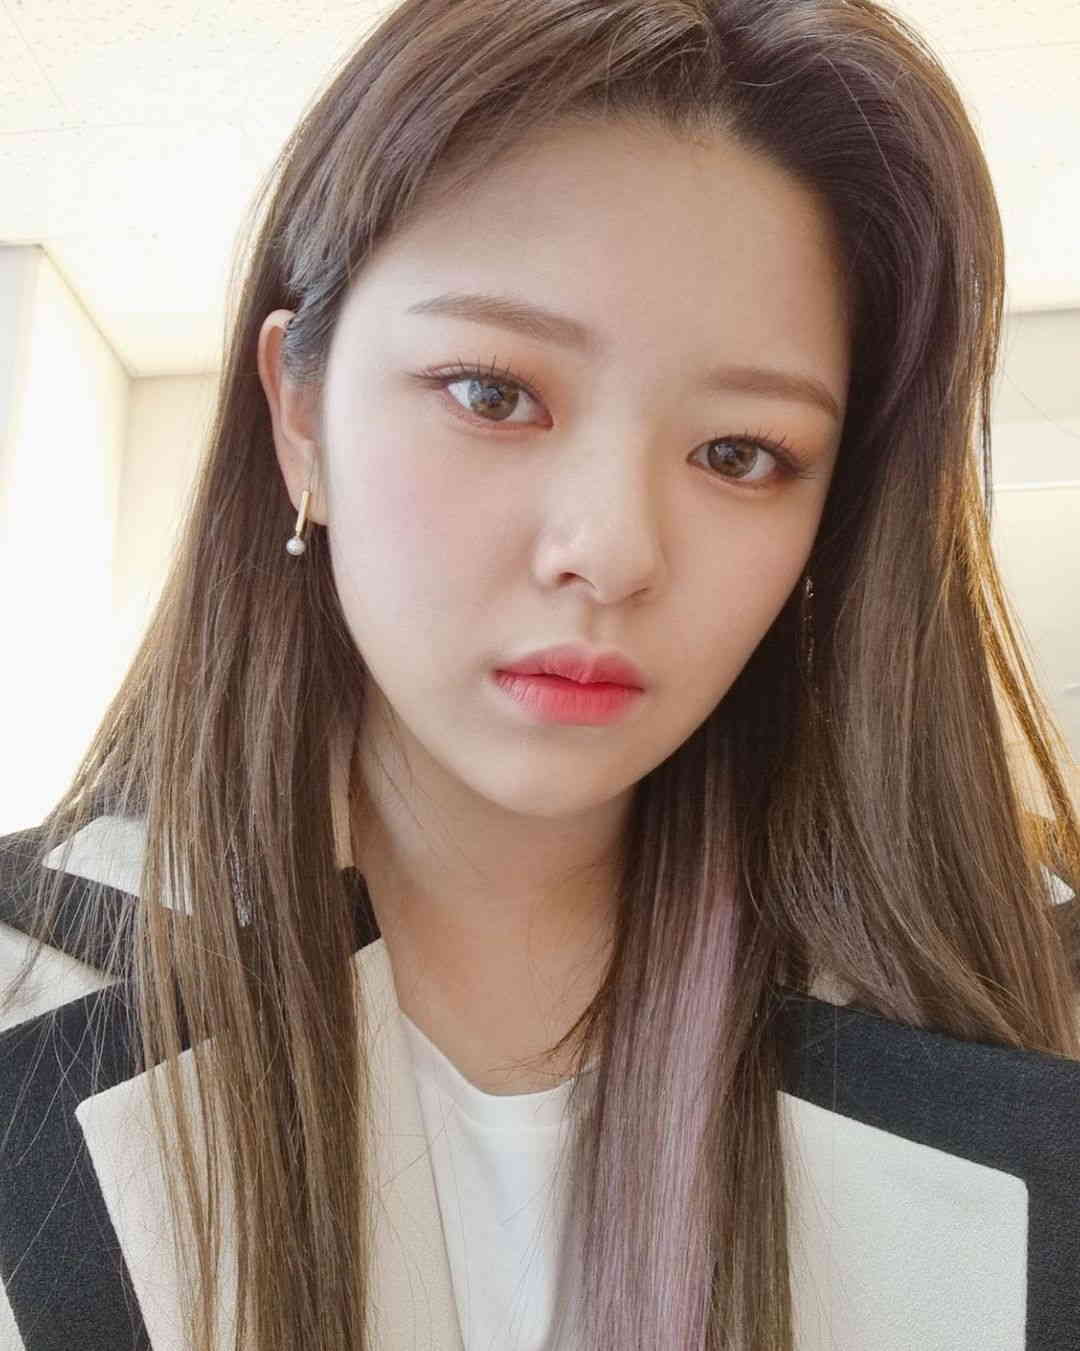 Jeongyeon TWICE - Biography, Profile, Facts, and Career